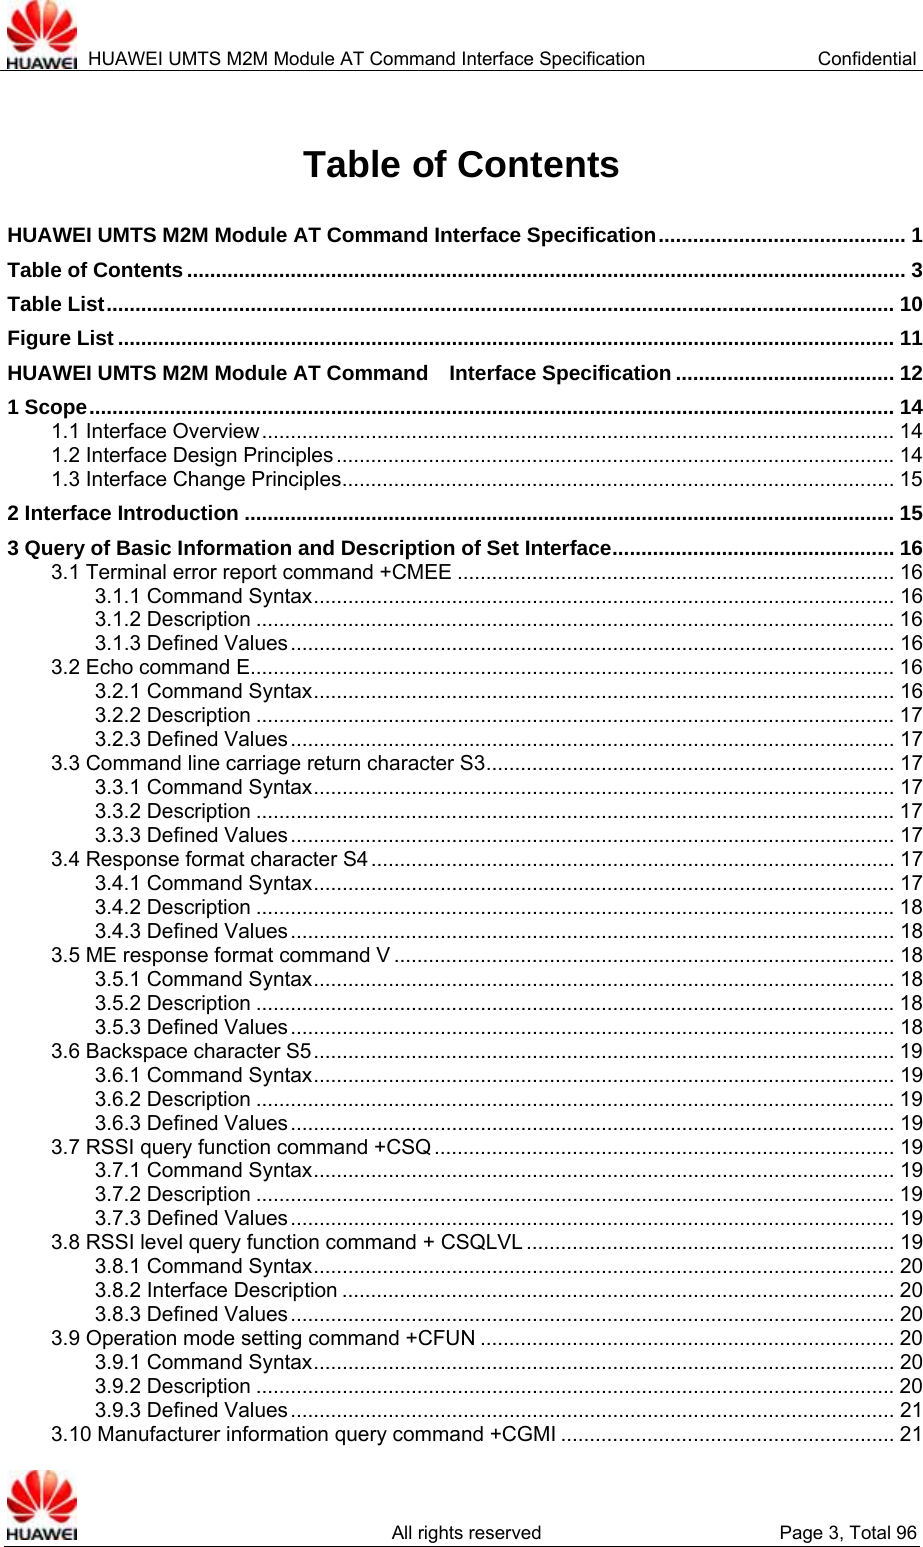  HUAWEI UMTS M2M Module AT Command Interface Specification  Confidential   All rights reserved  Page 3, Total 96 Table of Contents HUAWEI UMTS M2M Module AT Command Interface Specification........................................... 1 Table of Contents ............................................................................................................................. 3 Table List......................................................................................................................................... 10 Figure List ....................................................................................................................................... 11 HUAWEI UMTS M2M Module AT Command  Interface Specification ...................................... 12 1 Scope............................................................................................................................................ 14 1.1 Interface Overview.............................................................................................................. 14 1.2 Interface Design Principles .................................................................................................14 1.3 Interface Change Principles................................................................................................ 15 2 Interface Introduction ................................................................................................................. 15 3 Query of Basic Information and Description of Set Interface................................................. 16 3.1 Terminal error report command +CMEE ............................................................................ 16 3.1.1 Command Syntax..................................................................................................... 16 3.1.2 Description ...............................................................................................................16 3.1.3 Defined Values......................................................................................................... 16 3.2 Echo command E................................................................................................................ 16 3.2.1 Command Syntax..................................................................................................... 16 3.2.2 Description ...............................................................................................................17 3.2.3 Defined Values......................................................................................................... 17 3.3 Command line carriage return character S3....................................................................... 17 3.3.1 Command Syntax..................................................................................................... 17 3.3.2 Description ...............................................................................................................17 3.3.3 Defined Values......................................................................................................... 17 3.4 Response format character S4 ........................................................................................... 17 3.4.1 Command Syntax..................................................................................................... 17 3.4.2 Description ...............................................................................................................18 3.4.3 Defined Values......................................................................................................... 18 3.5 ME response format command V ....................................................................................... 18 3.5.1 Command Syntax..................................................................................................... 18 3.5.2 Description ...............................................................................................................18 3.5.3 Defined Values......................................................................................................... 18 3.6 Backspace character S5..................................................................................................... 19 3.6.1 Command Syntax..................................................................................................... 19 3.6.2 Description ...............................................................................................................19 3.6.3 Defined Values......................................................................................................... 19 3.7 RSSI query function command +CSQ ................................................................................ 19 3.7.1 Command Syntax..................................................................................................... 19 3.7.2 Description ...............................................................................................................19 3.7.3 Defined Values......................................................................................................... 19 3.8 RSSI level query function command + CSQLVL ................................................................ 19 3.8.1 Command Syntax..................................................................................................... 20 3.8.2 Interface Description ................................................................................................ 20 3.8.3 Defined Values......................................................................................................... 20 3.9 Operation mode setting command +CFUN ........................................................................ 20 3.9.1 Command Syntax..................................................................................................... 20 3.9.2 Description ...............................................................................................................20 3.9.3 Defined Values......................................................................................................... 21 3.10 Manufacturer information query command +CGMI .......................................................... 21 